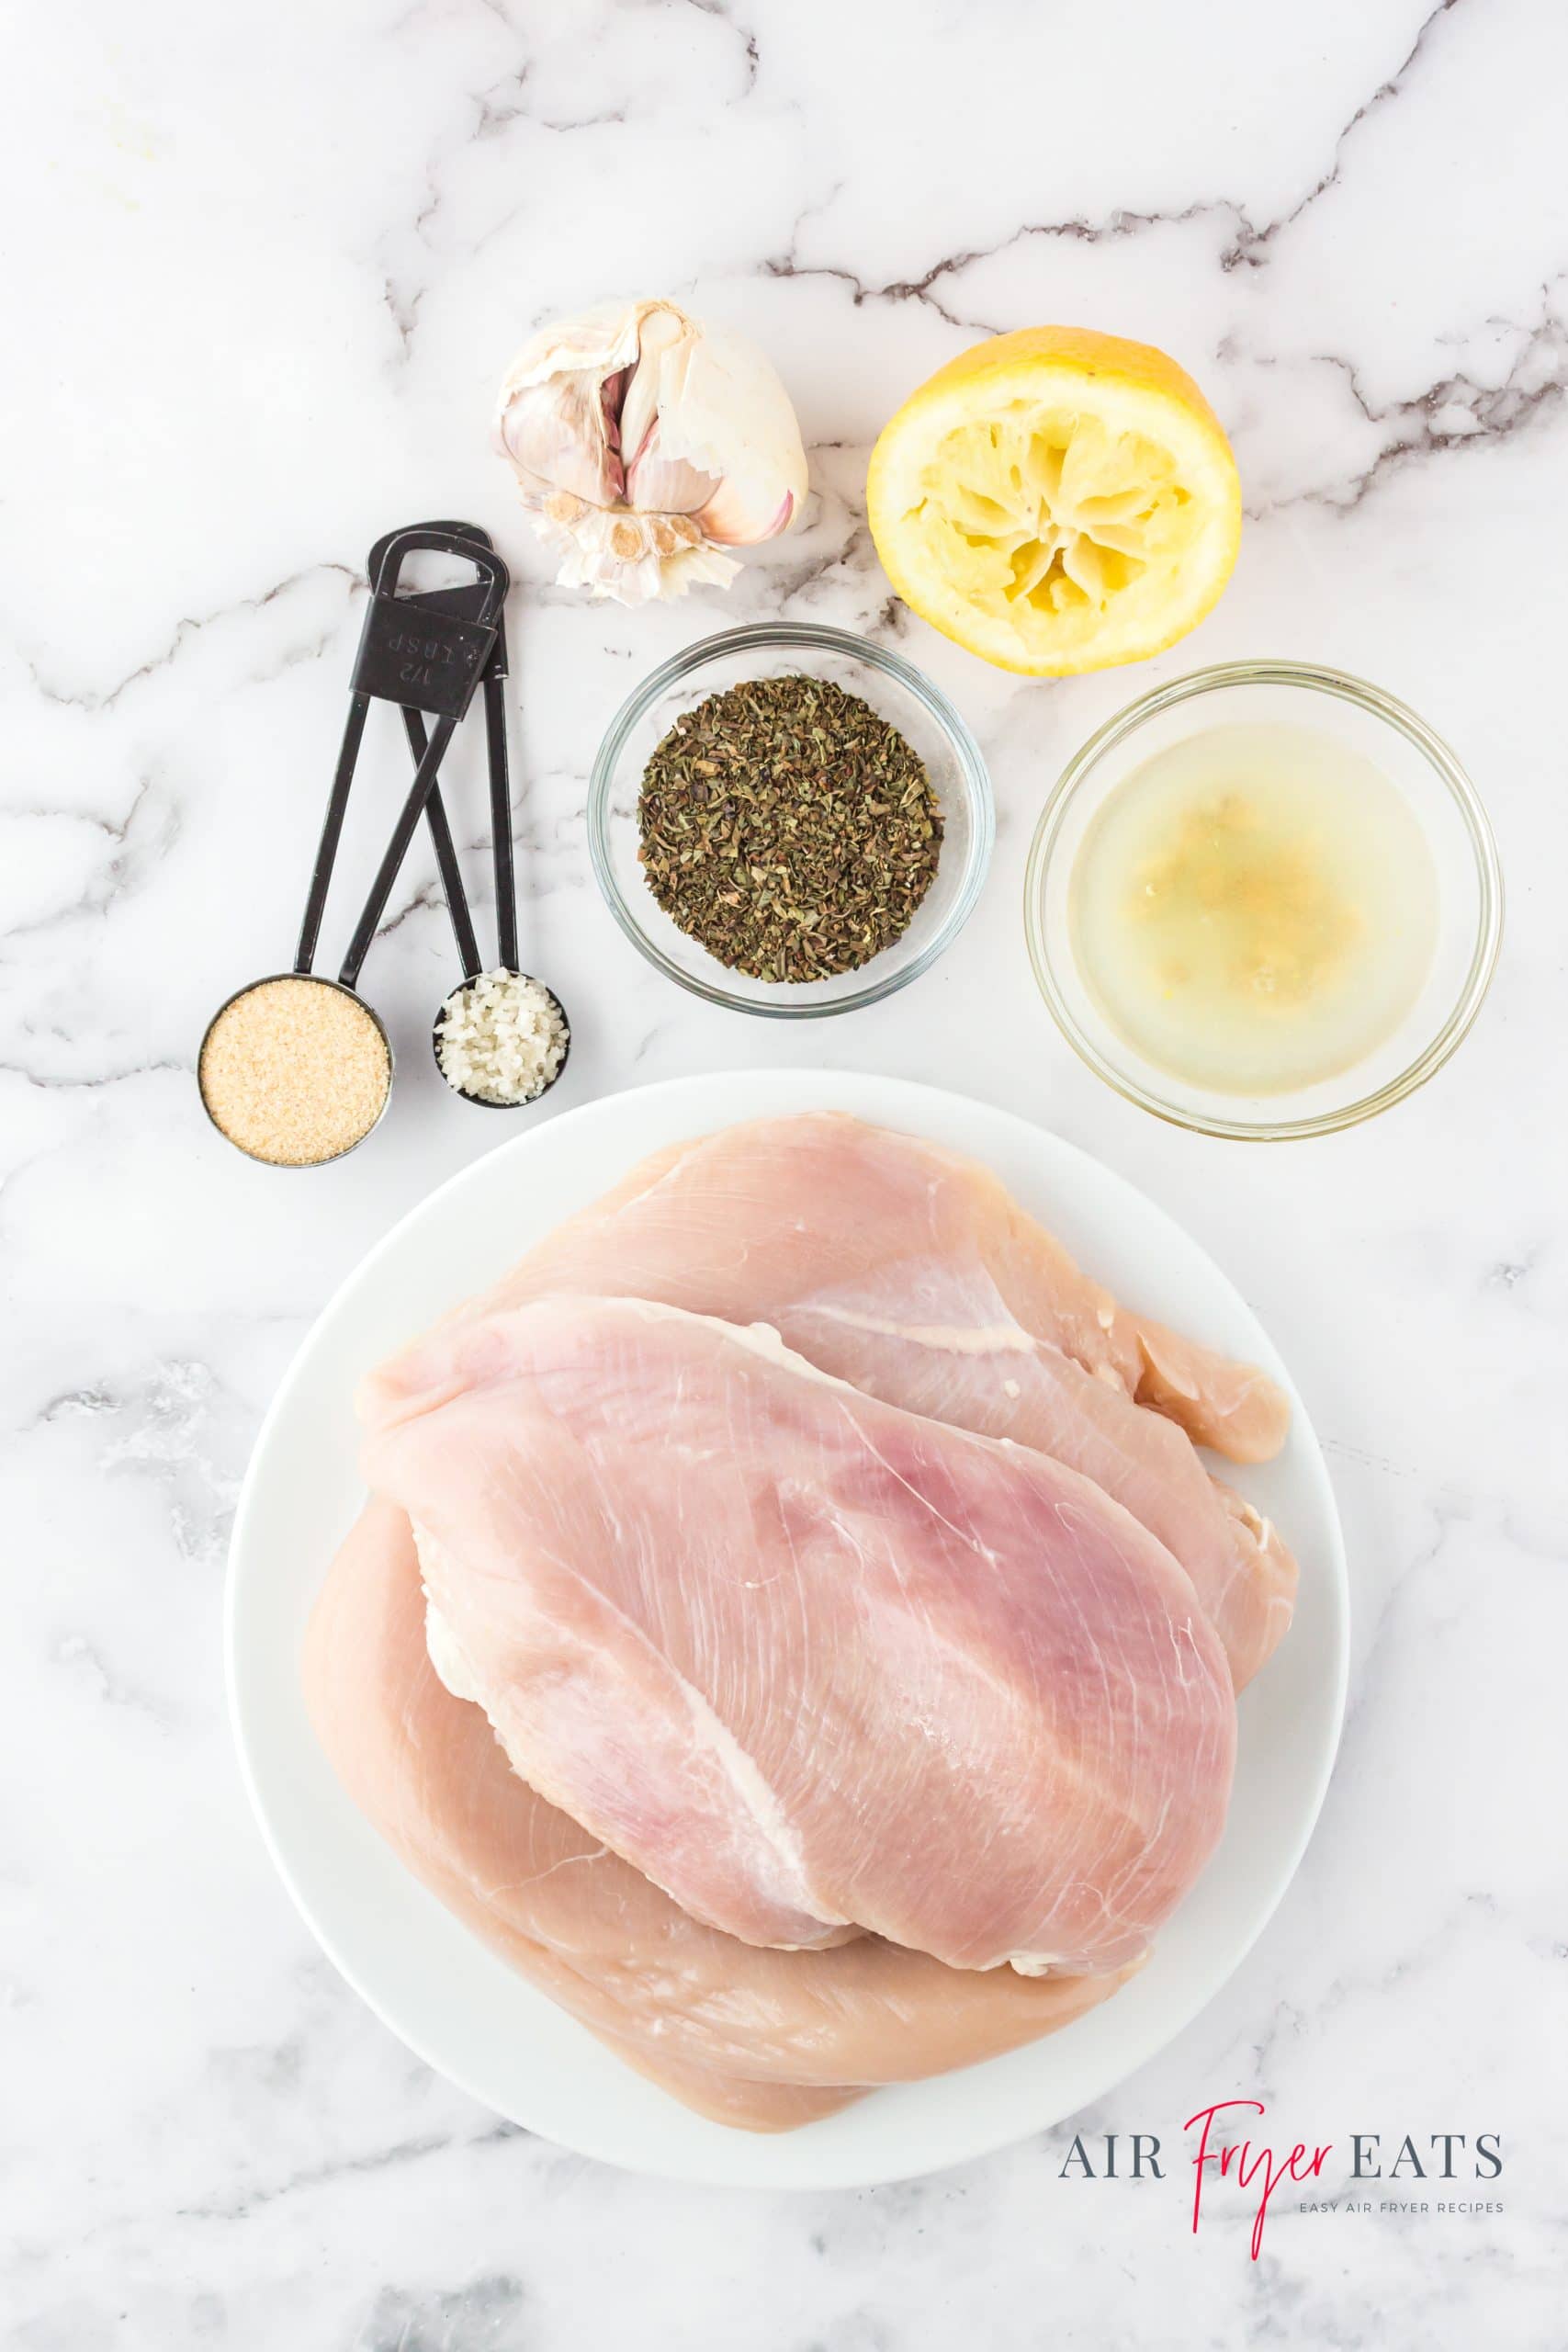 a plate of raw chicken breasts, and small bowls of seasonings, including lemon juice and zest, salt, pepper, basil, and garlic powder.